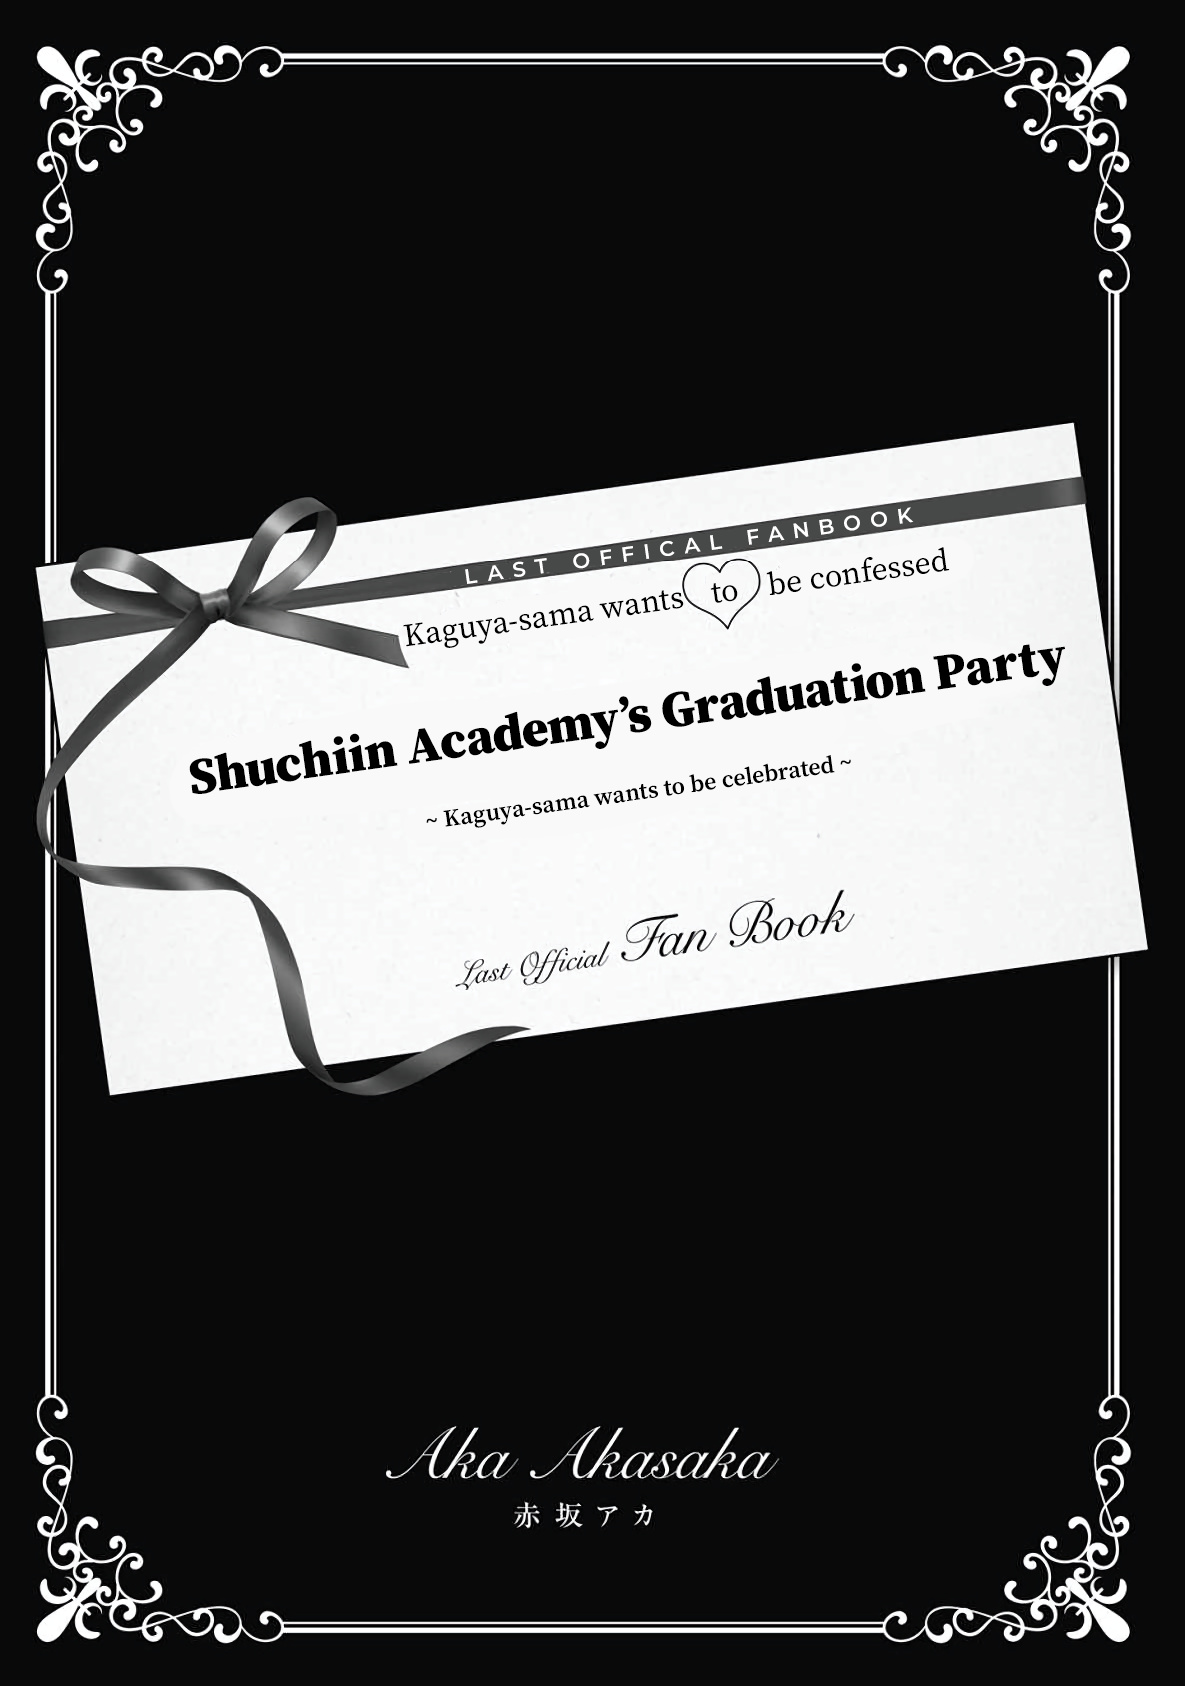 Shuchiin Academy’S Graduation Party ~Kaguya-Sama Wants To Be Celebrated~: Last Official Fanbook - Page 2